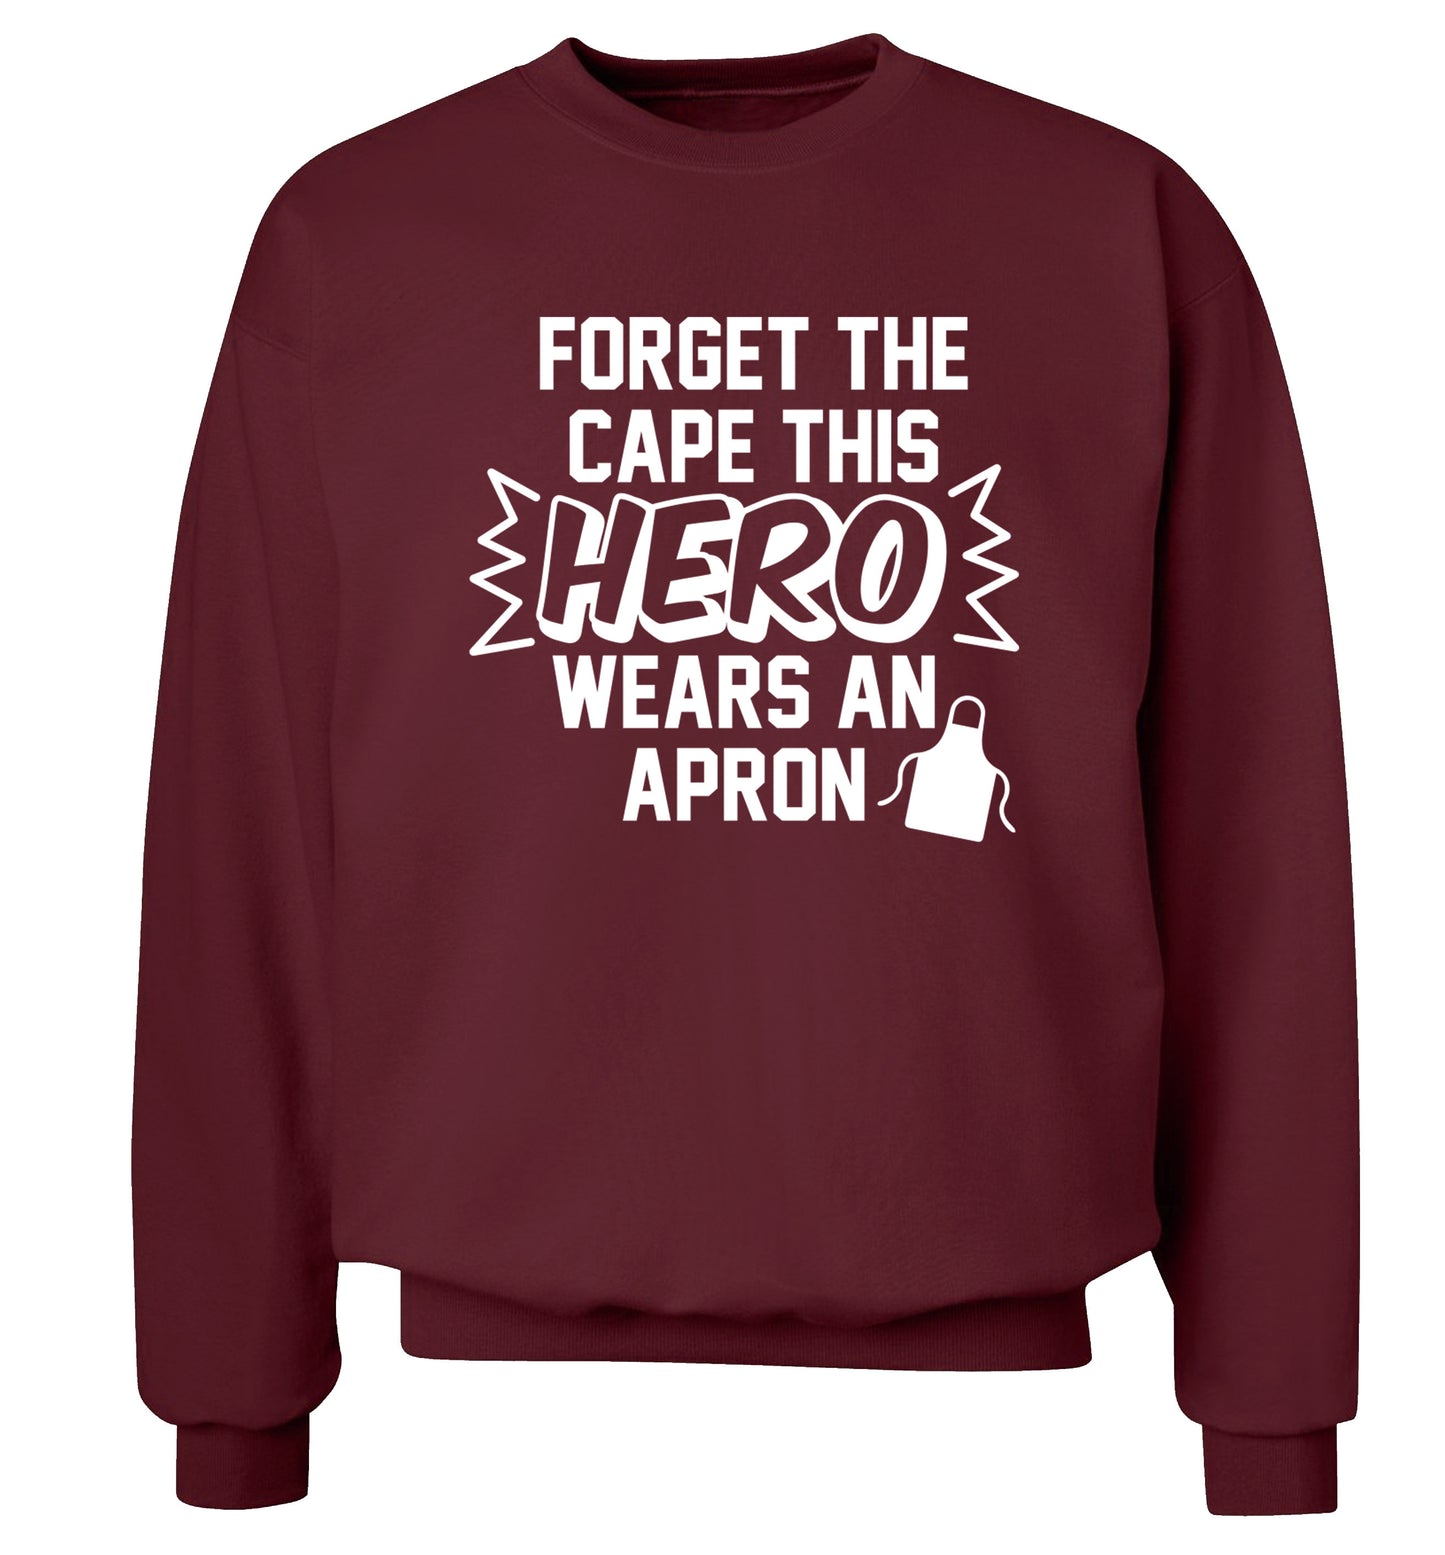 Forget the cape this hero wears an apron Adult's unisex maroon Sweater 2XL